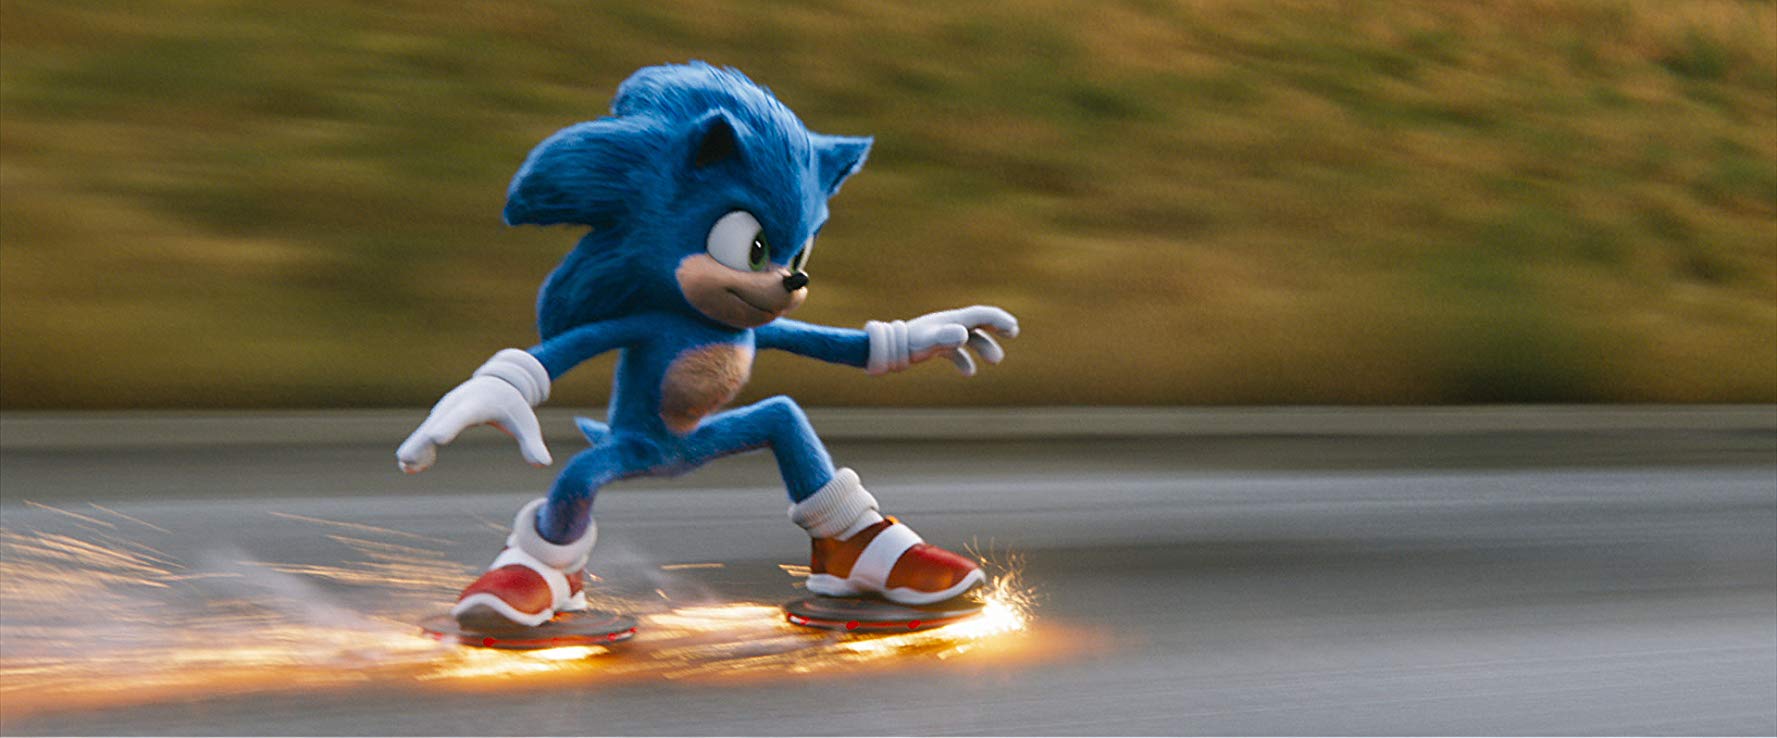 Sonic The Hedgehog' live action movie gets fresh trailer with new Sonic  design, Page 7